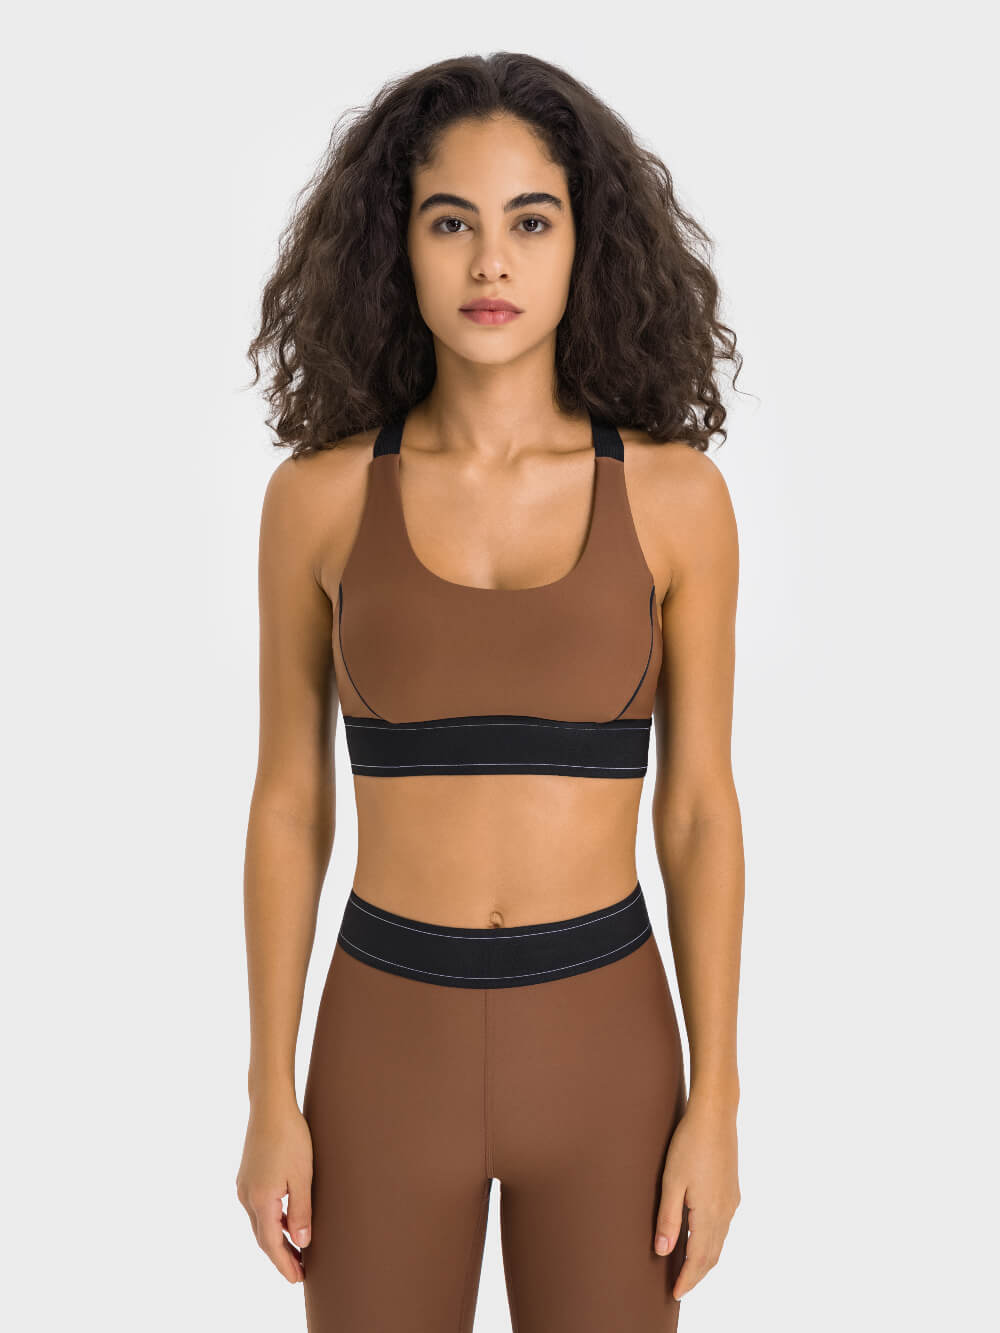 1,067 Sports Bra That Lifts And Separates Images, Stock Photos, 3D objects,  & Vectors